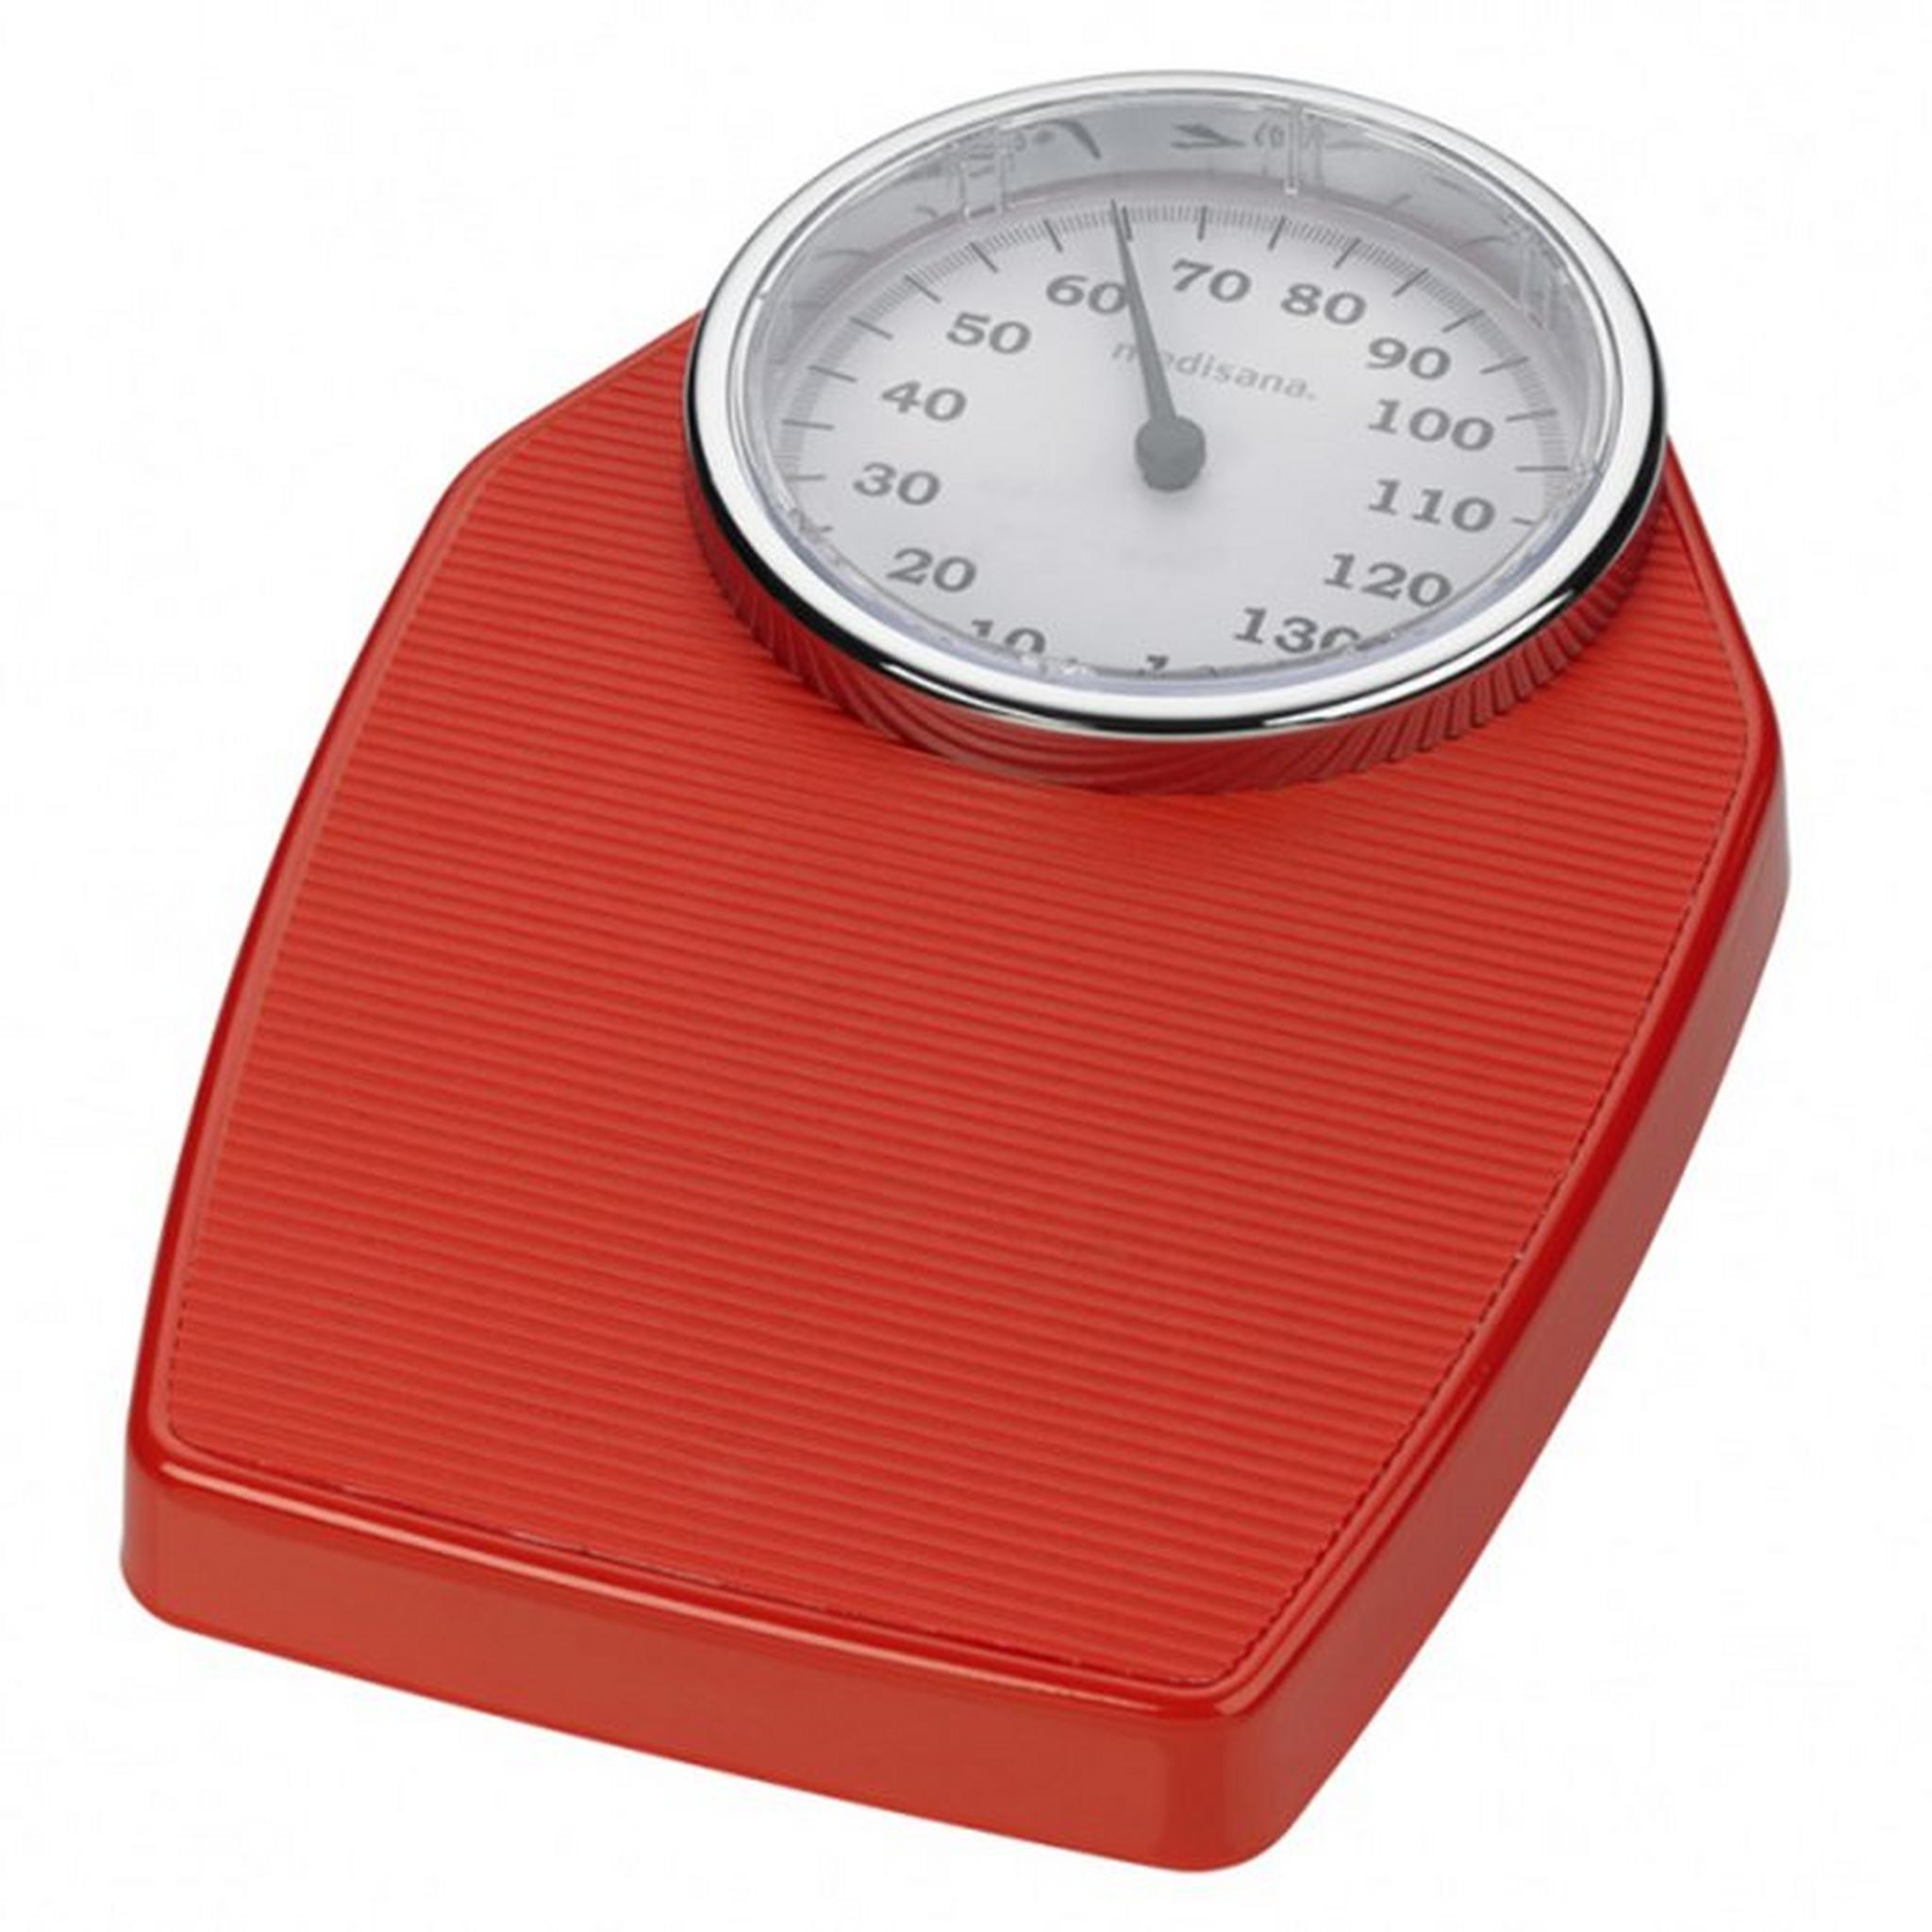 Medisana PSD Personal Scale, 40498 - Red